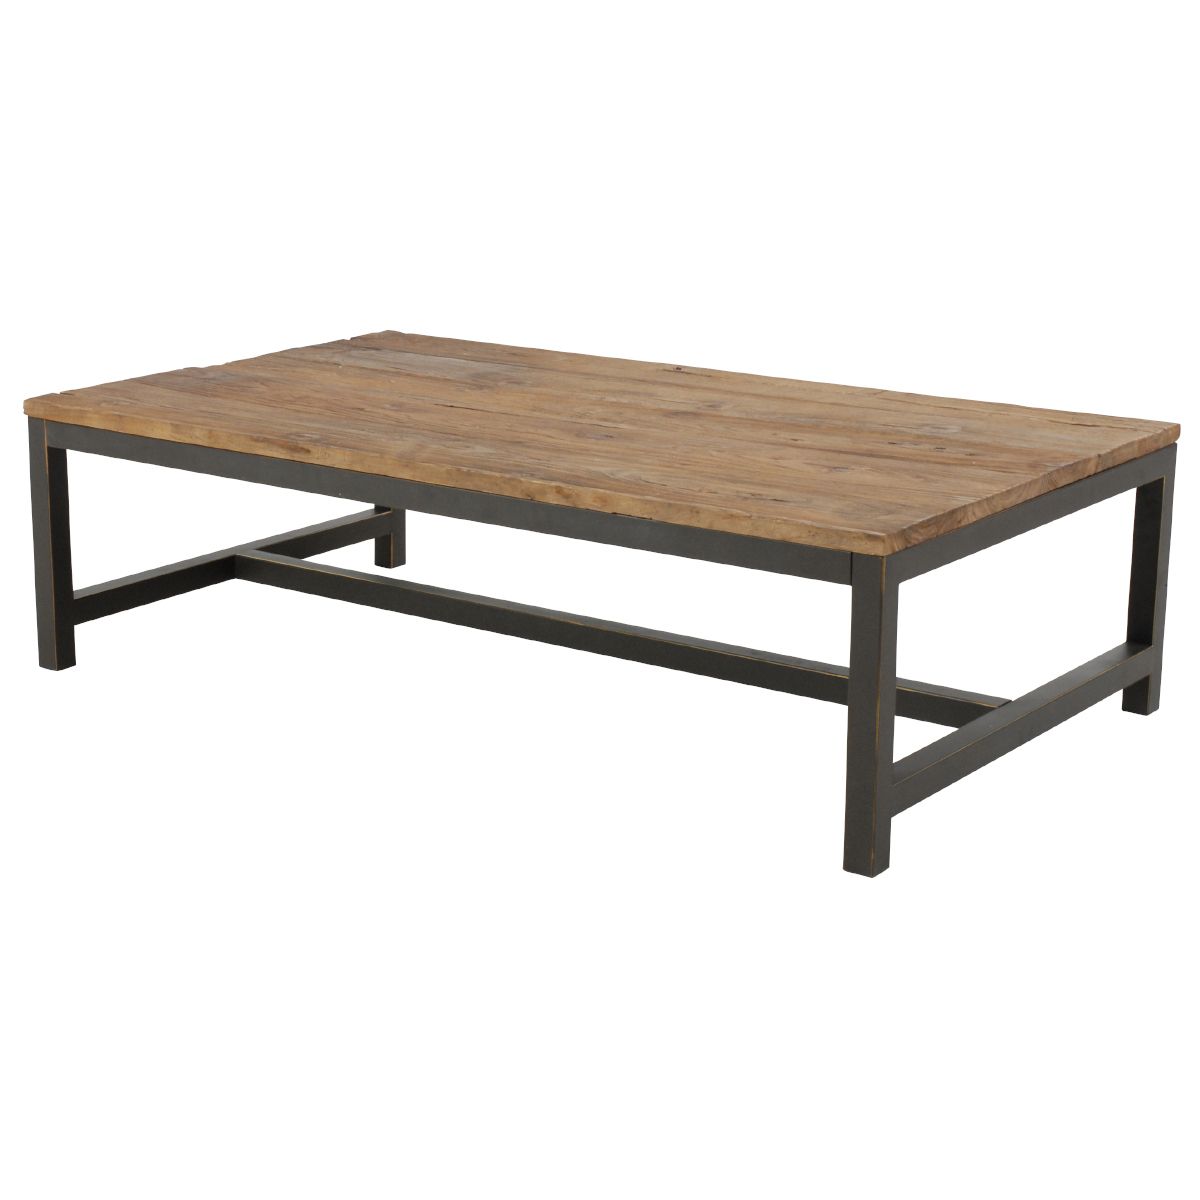 Elm Vintage Coffee Table Old Waxed Antique Metal Leg – Iddesign Throughout Old Elm Coffee Tables (View 14 of 15)